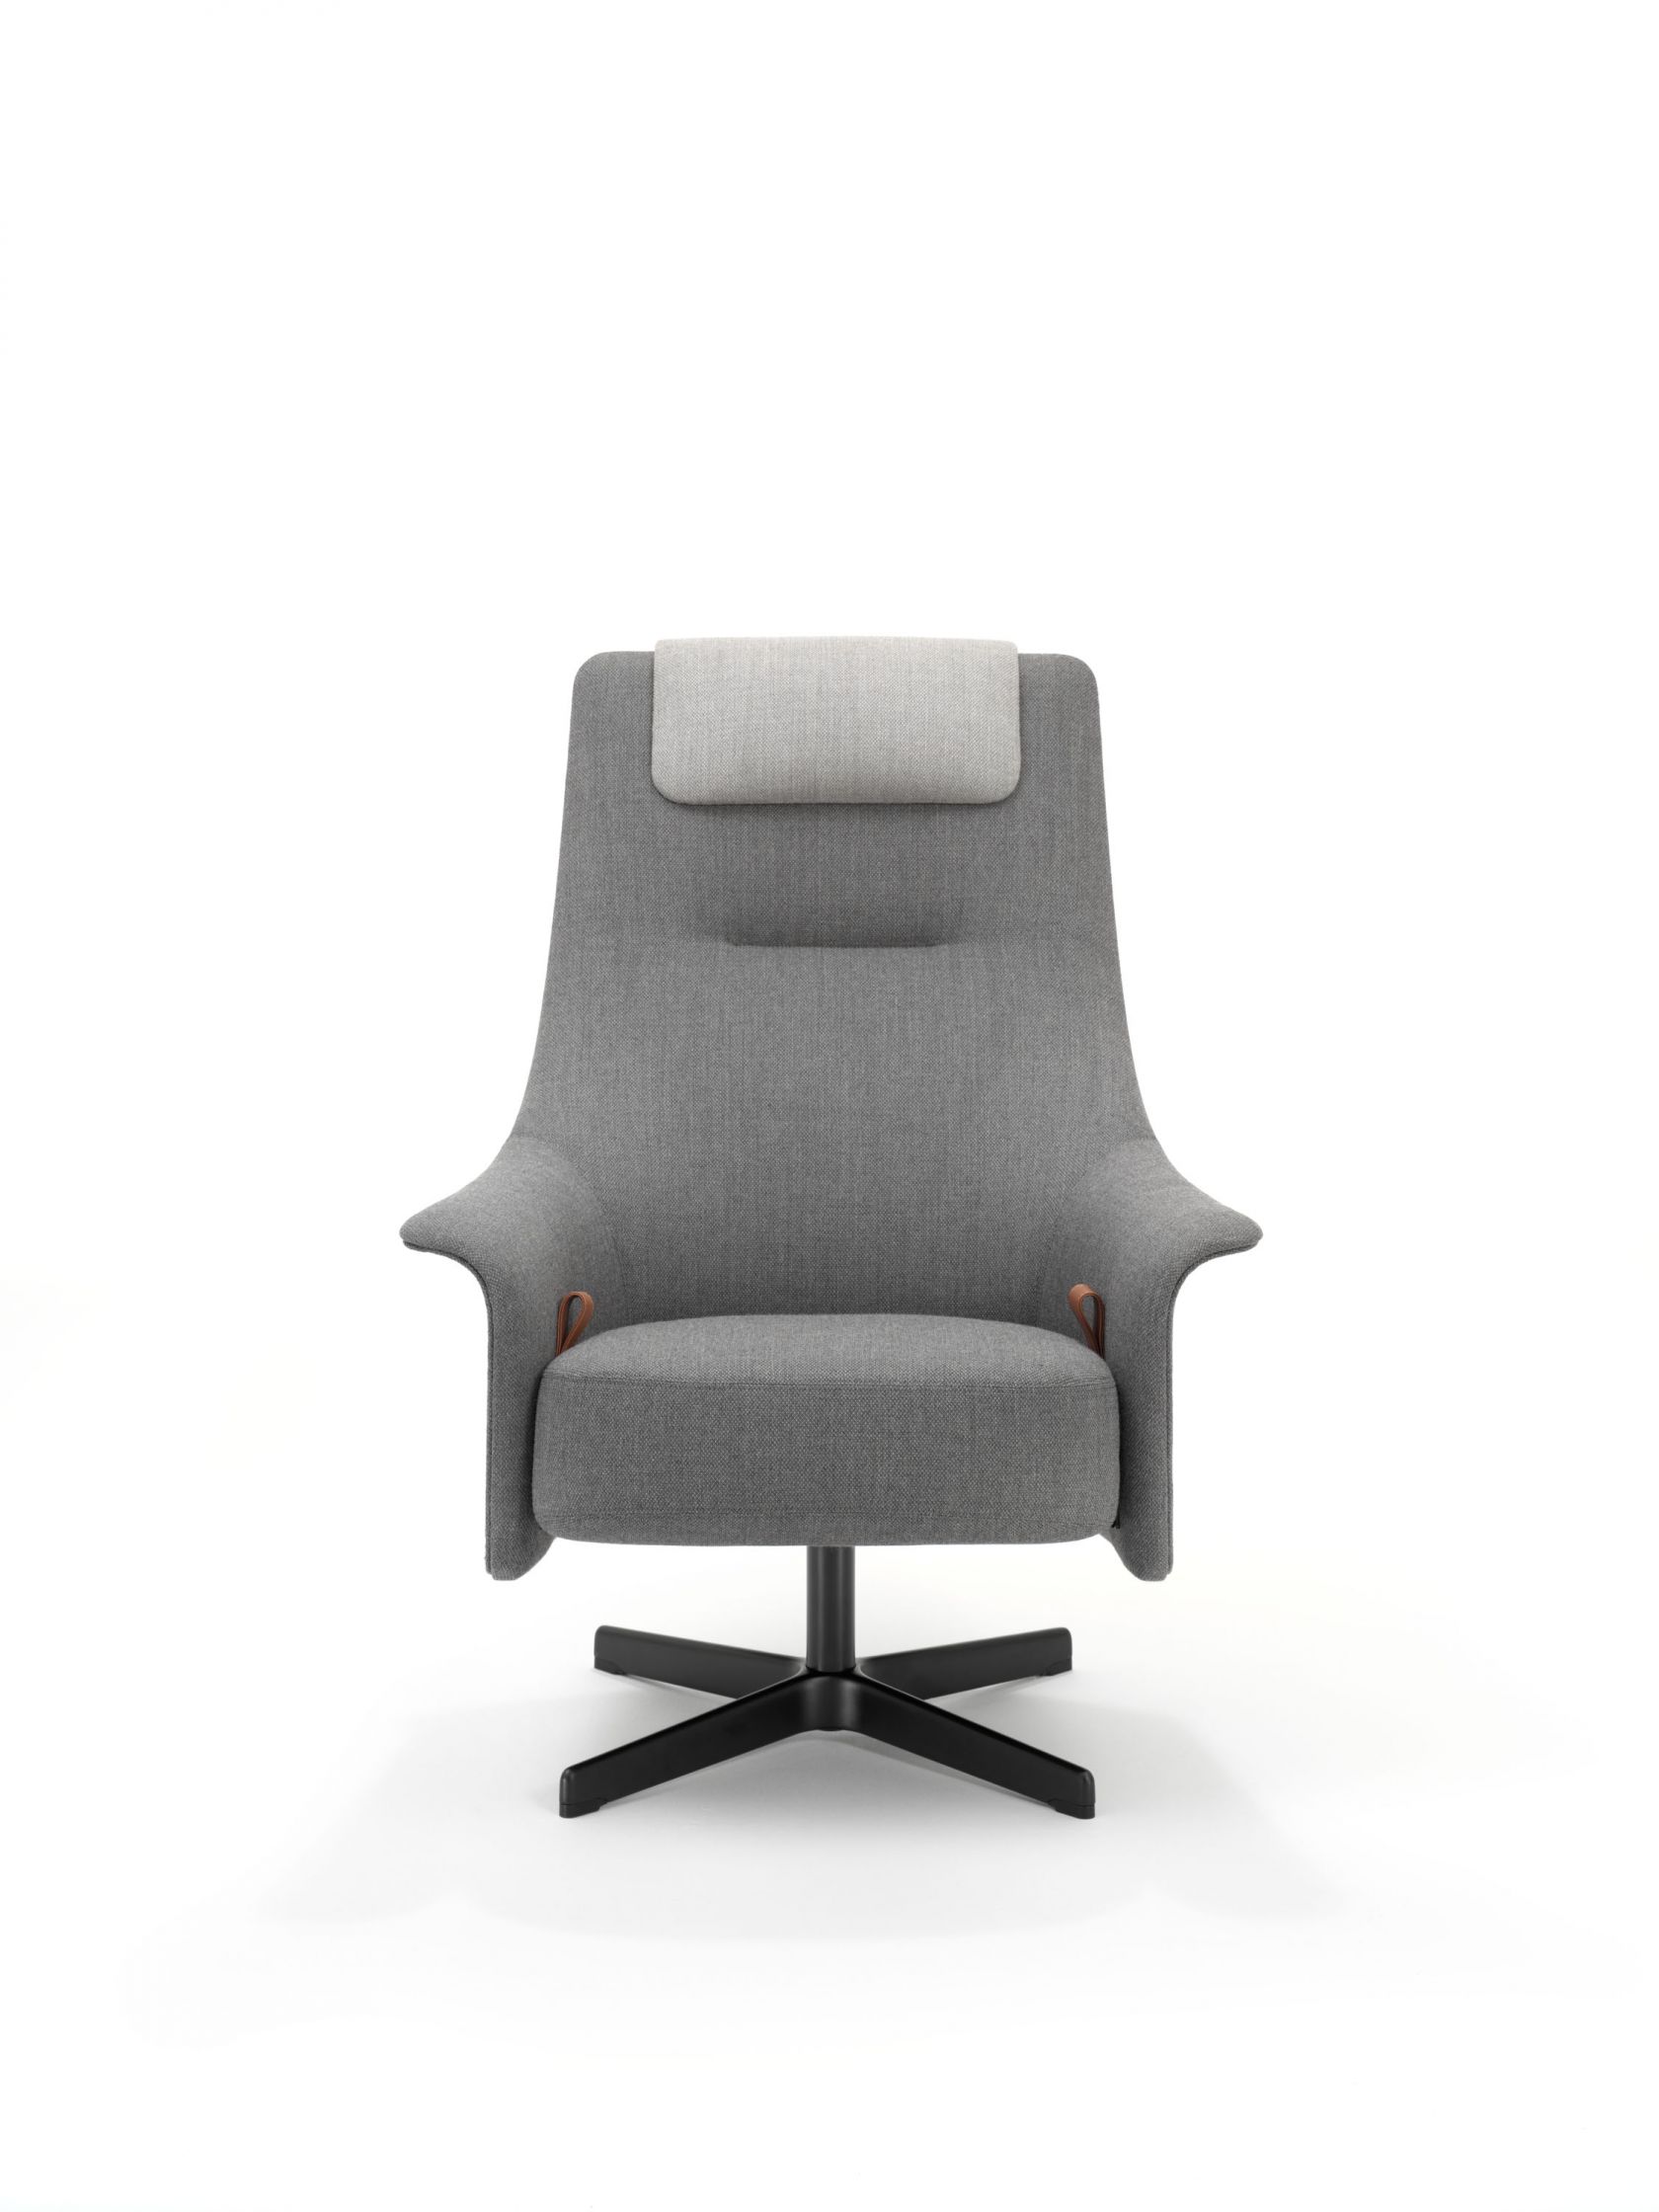 Ports Lounge Chair in Grey